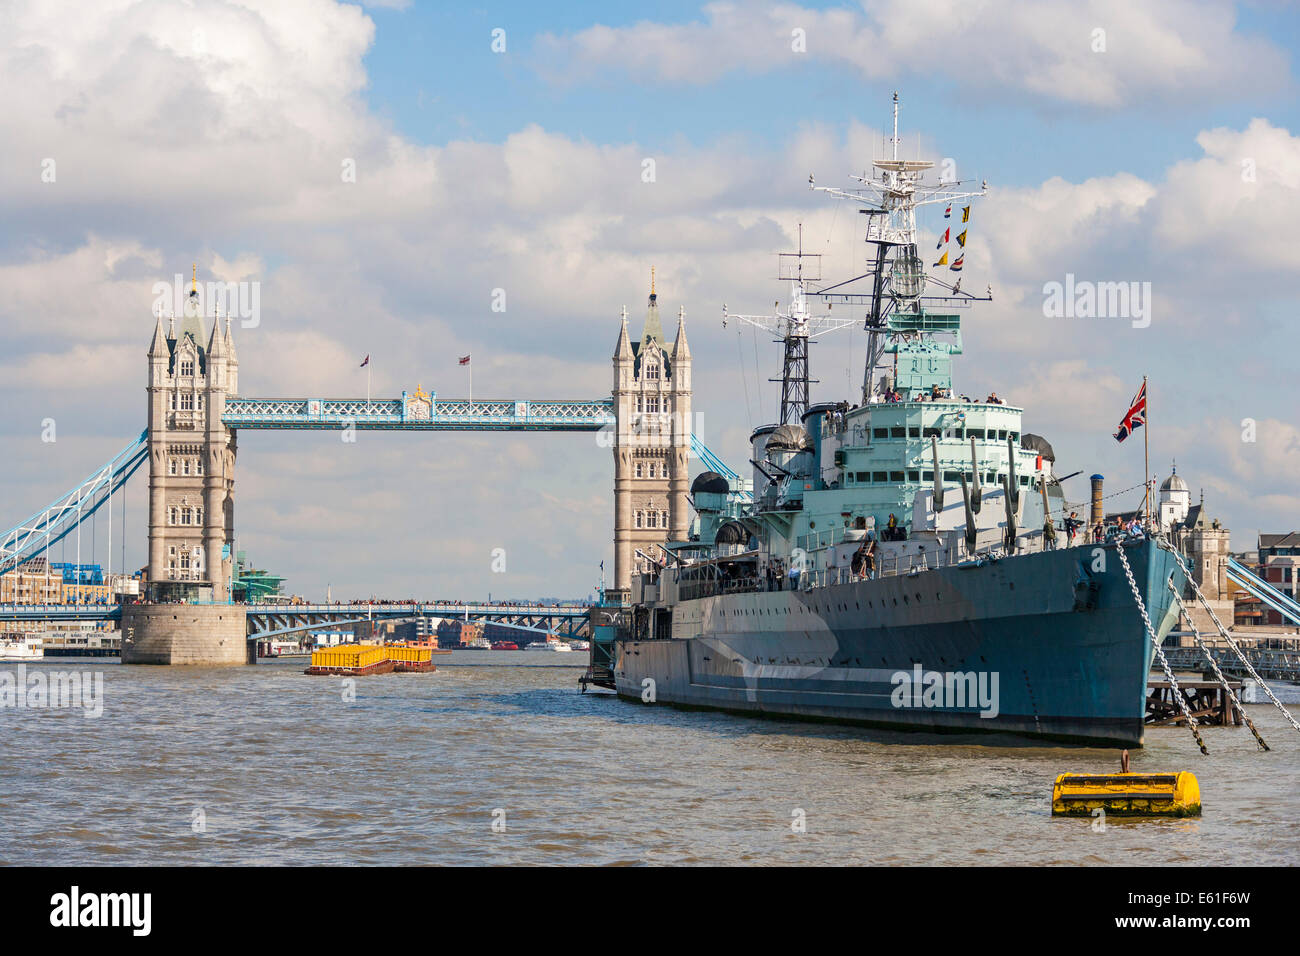 Tower Bridge and HMS Belfast warship on the River Thames London England UK viewed from a boat on the river. JMH6341 Stock Photo